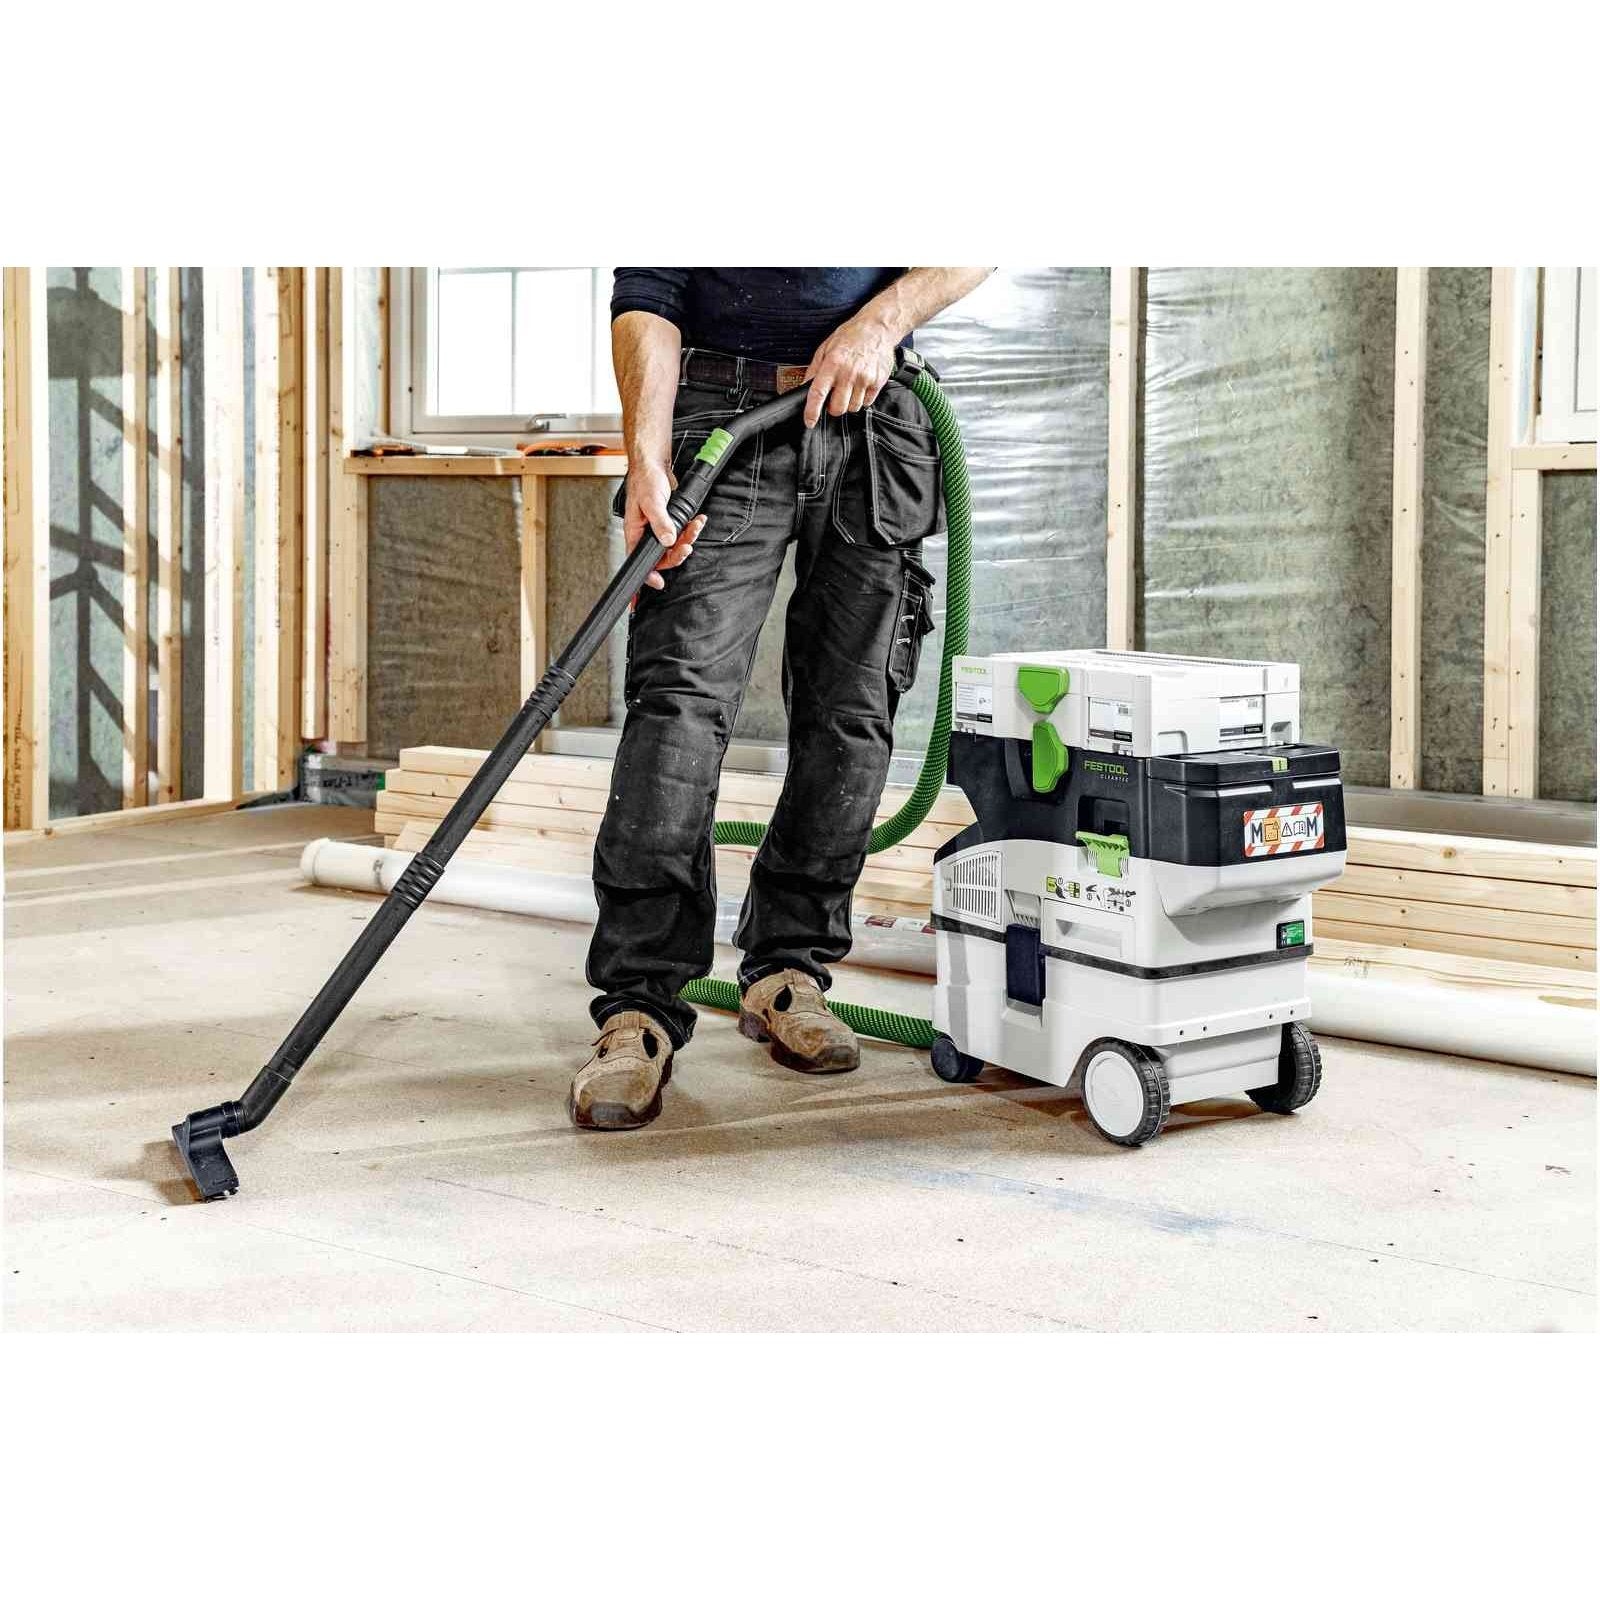 Festool Cordless Mobile Dust Extractor CTMC MIDI I Promo Kit With Batteries & Charger 577067-PROMO tool-junction-nz